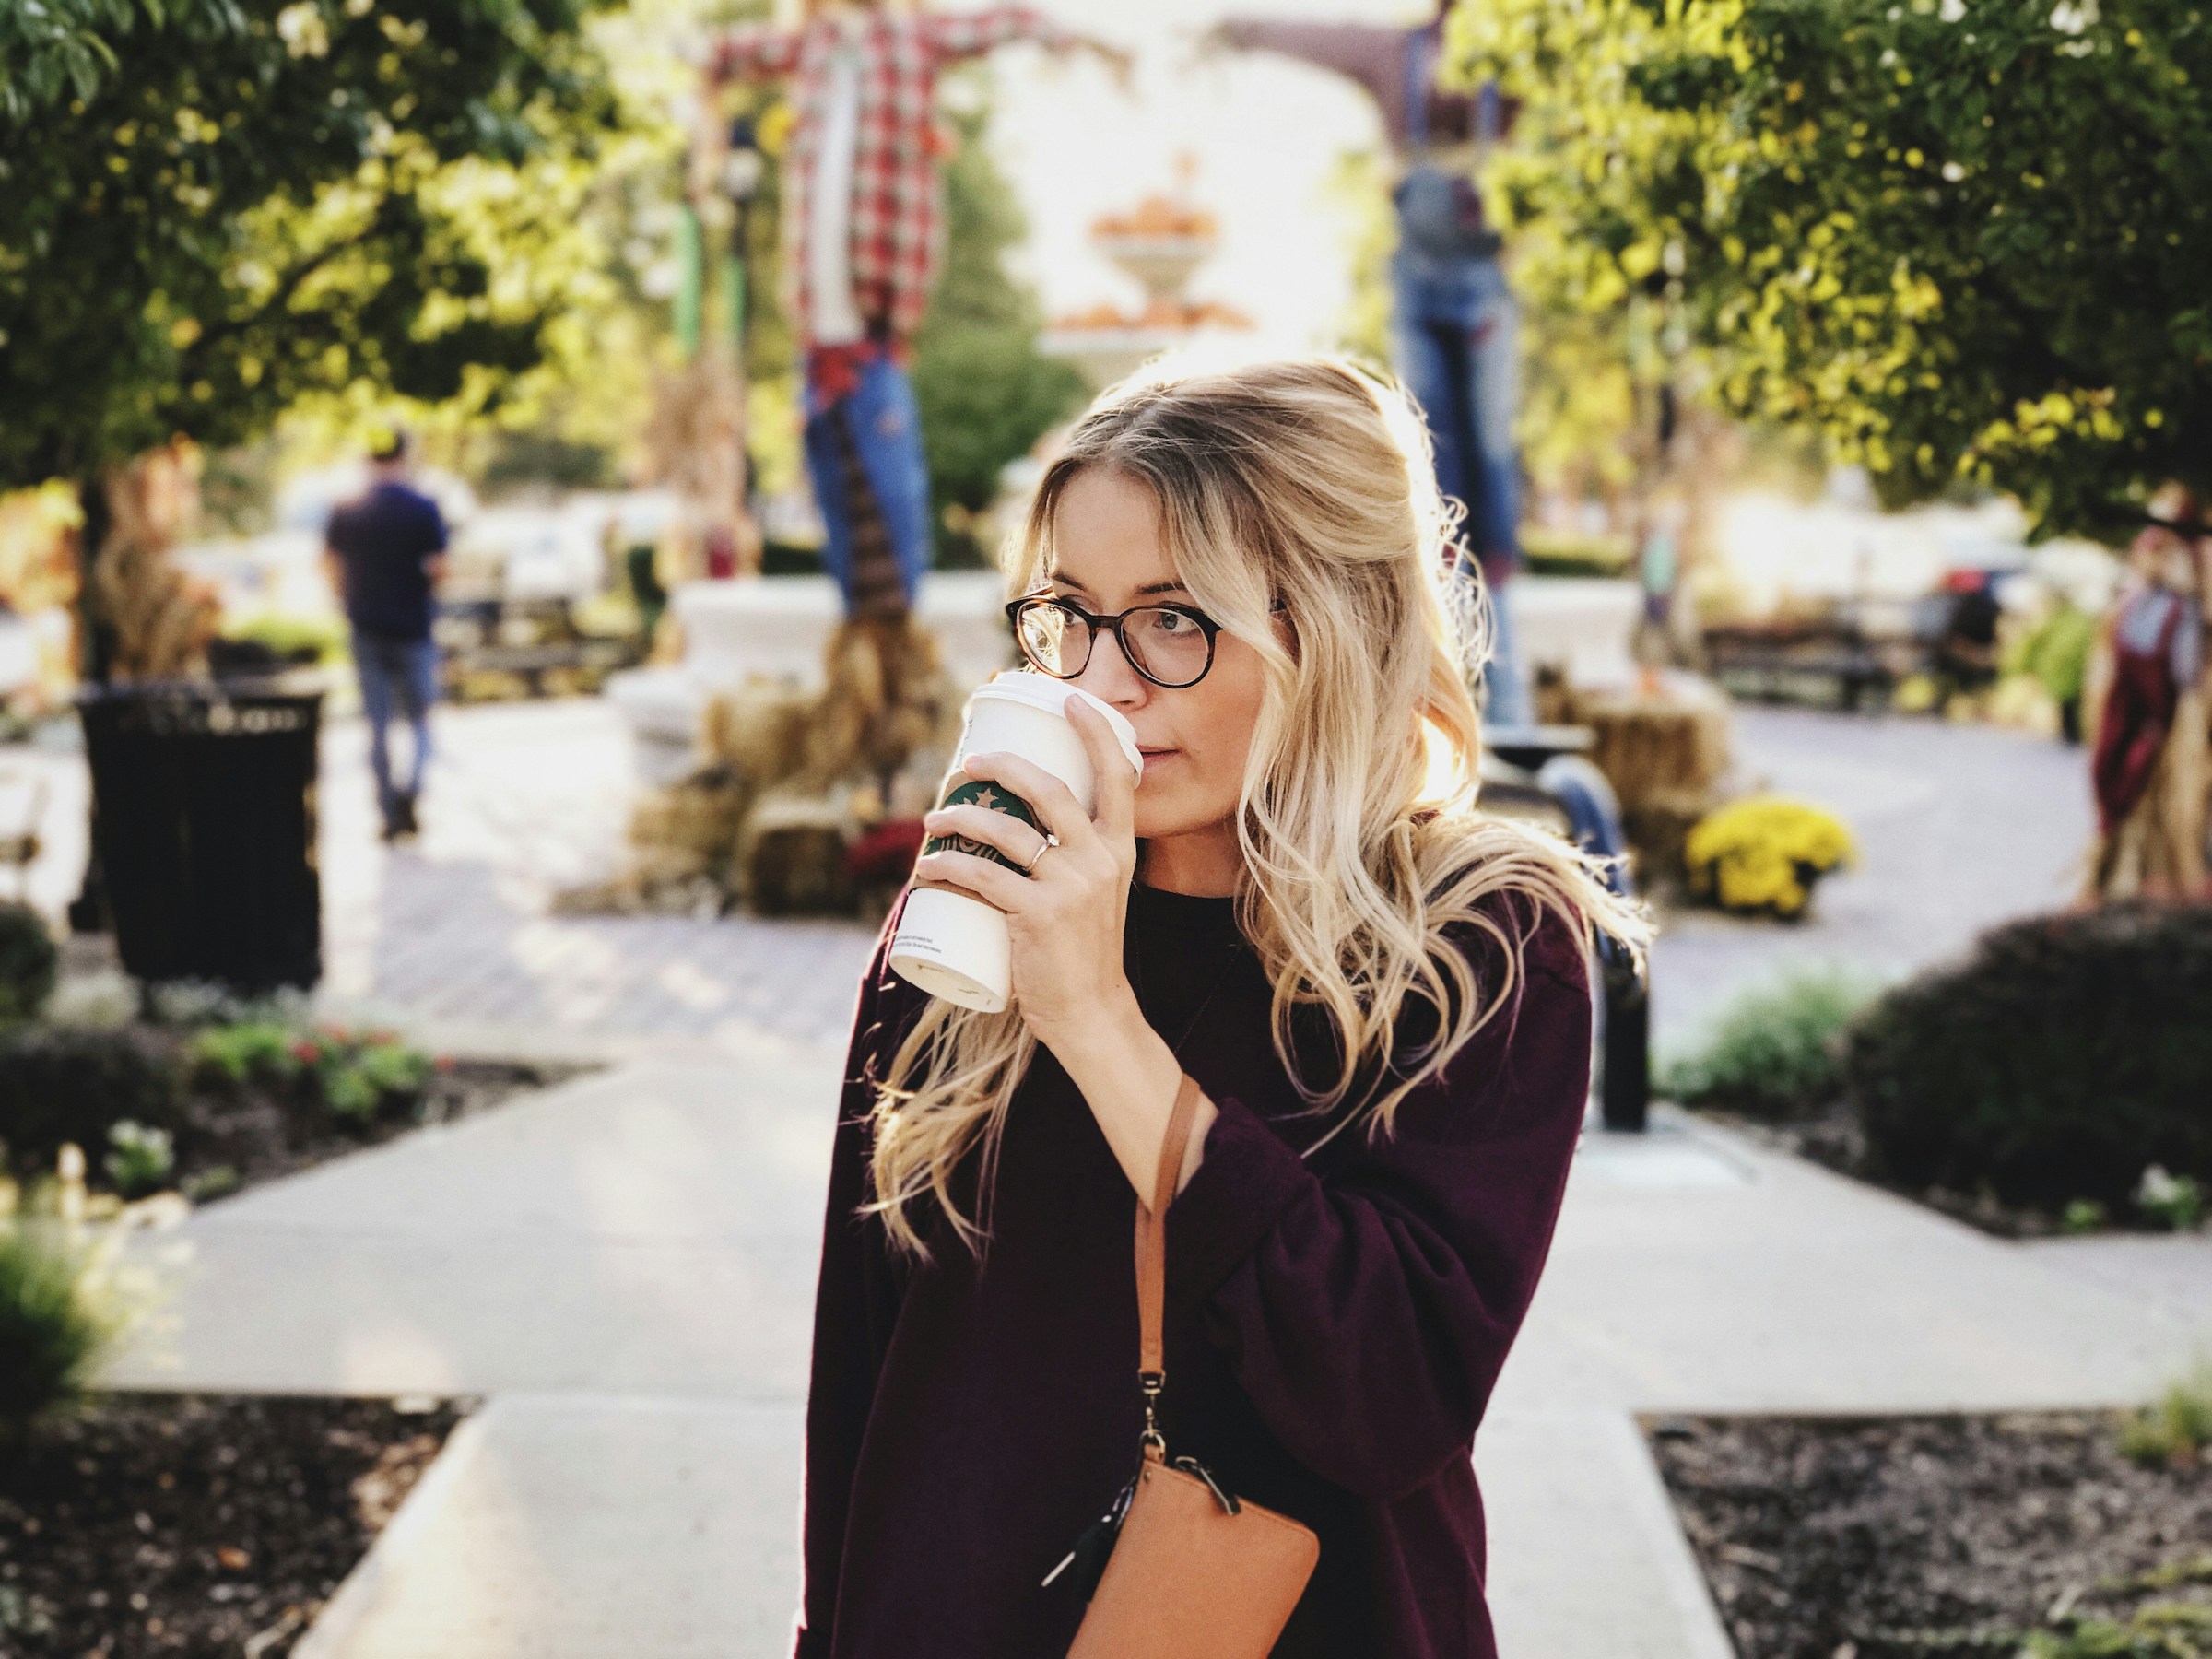 A woman drinking coffee while walking outside | Source: Unsplash